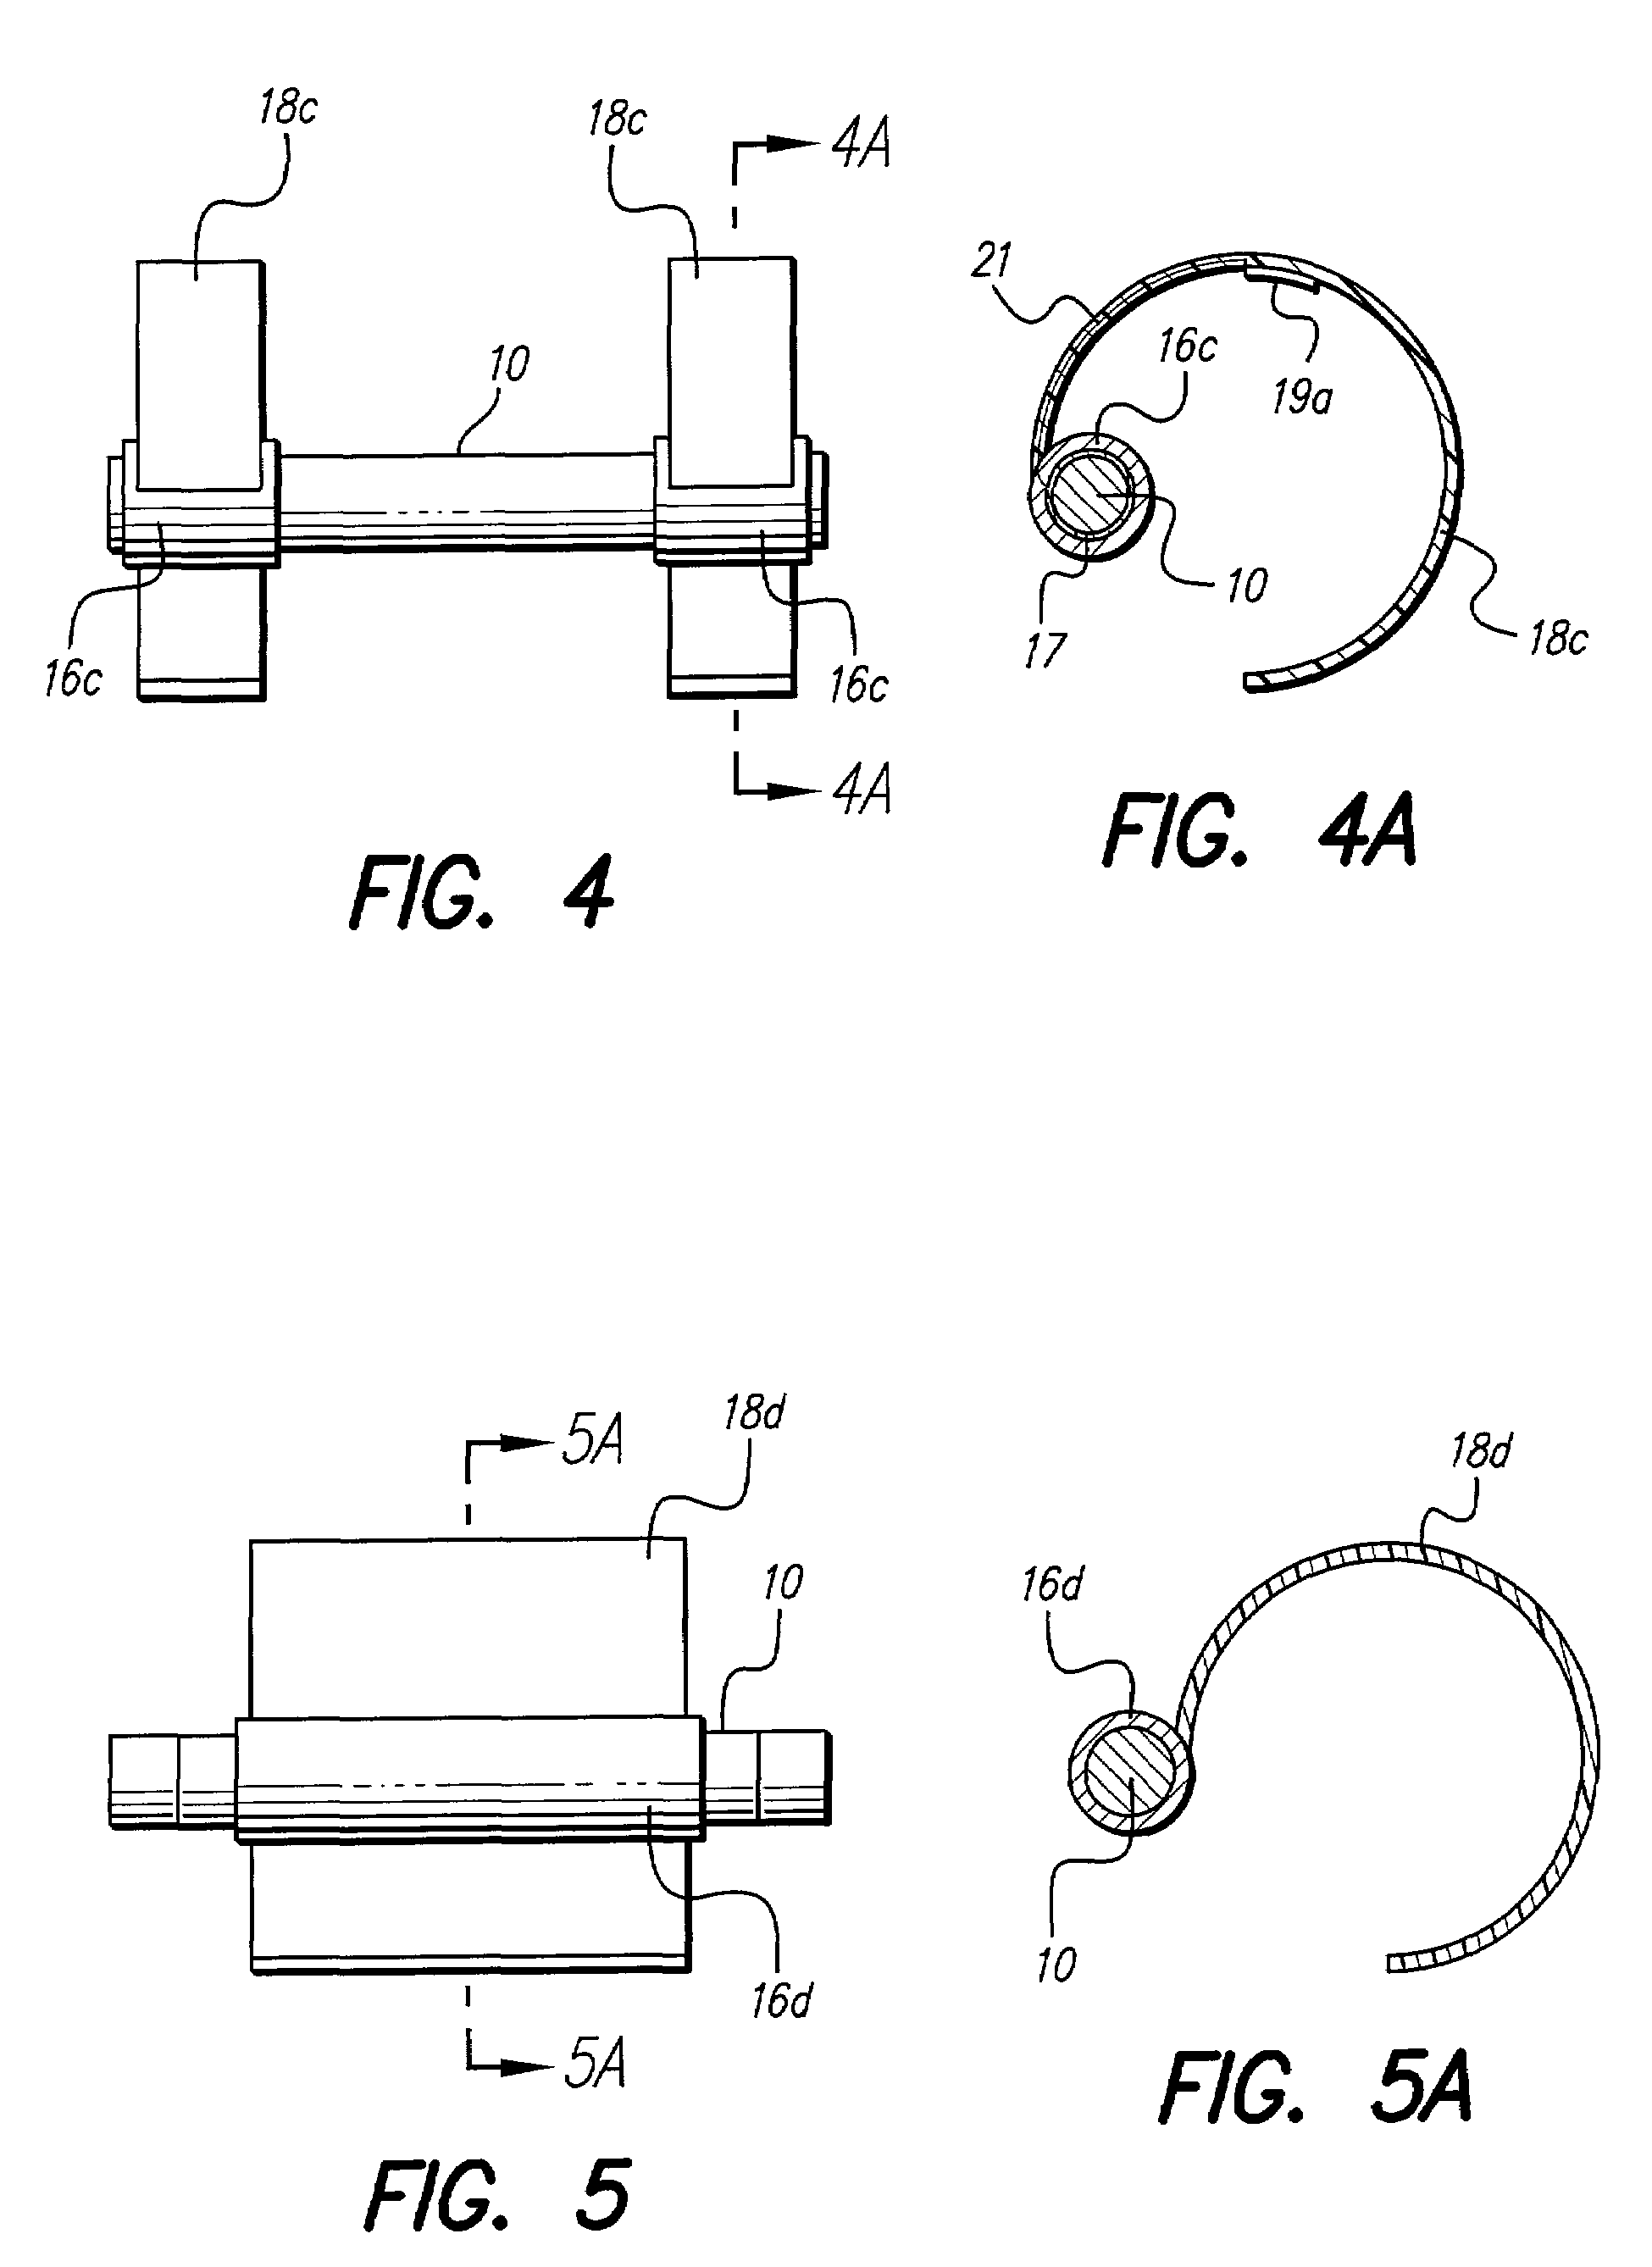 Fixation device for implantable microdevices